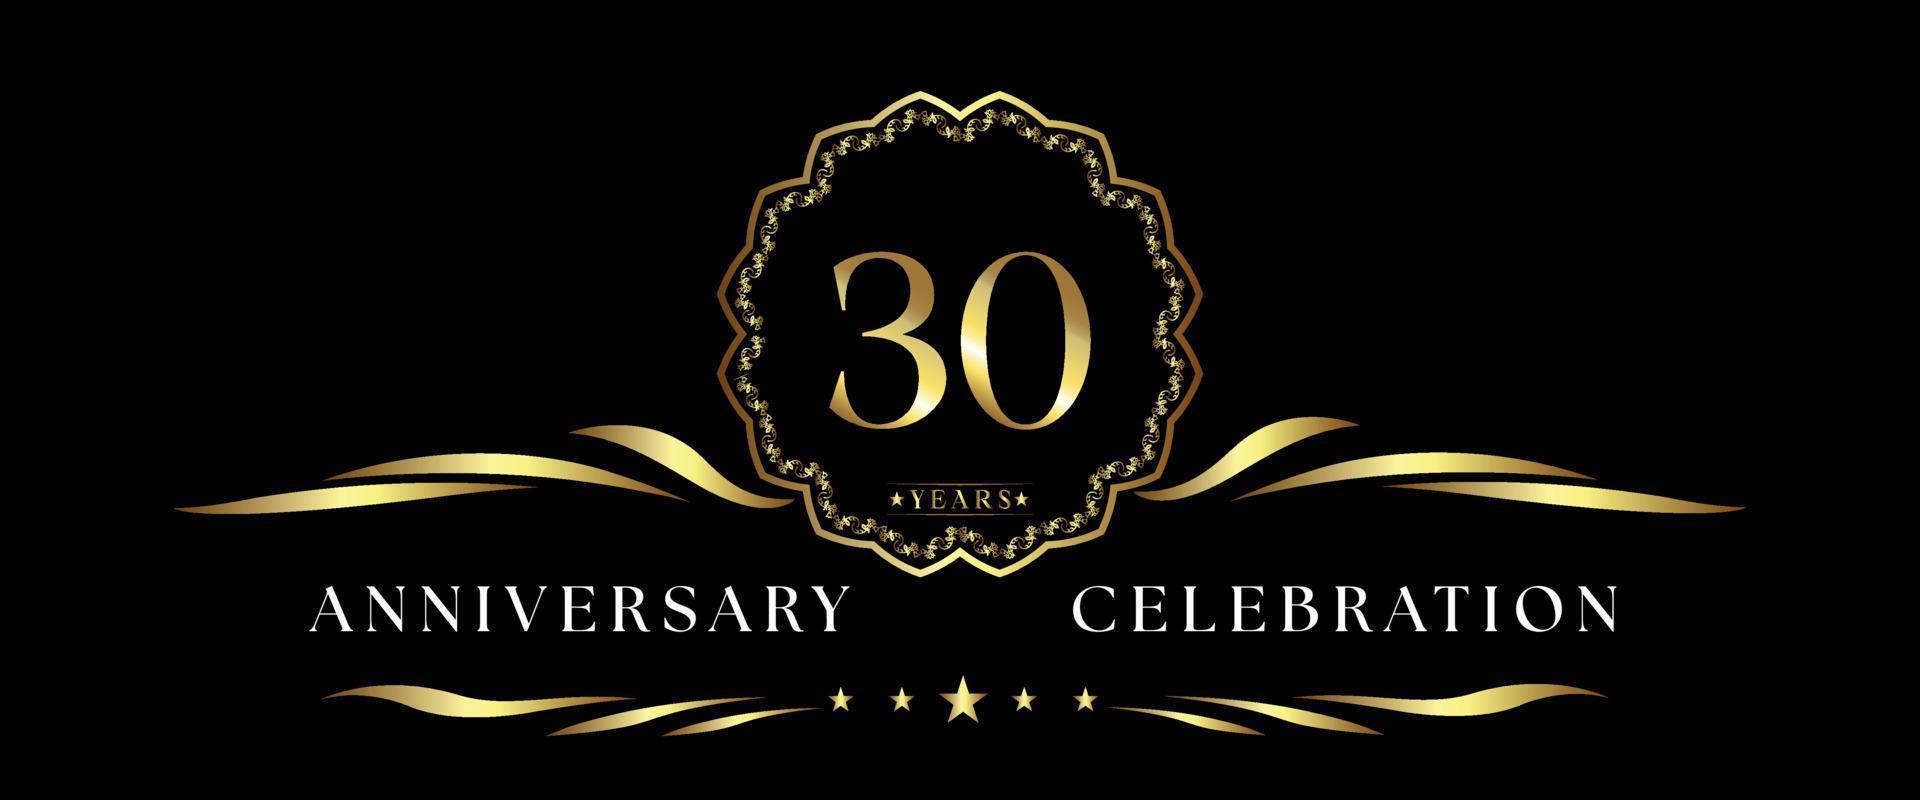 30 years anniversary celebration with gold decorative frame isolated on black background. Vector design for greeting card, birthday party, wedding, event party, ceremony. 30 years Anniversary logo.